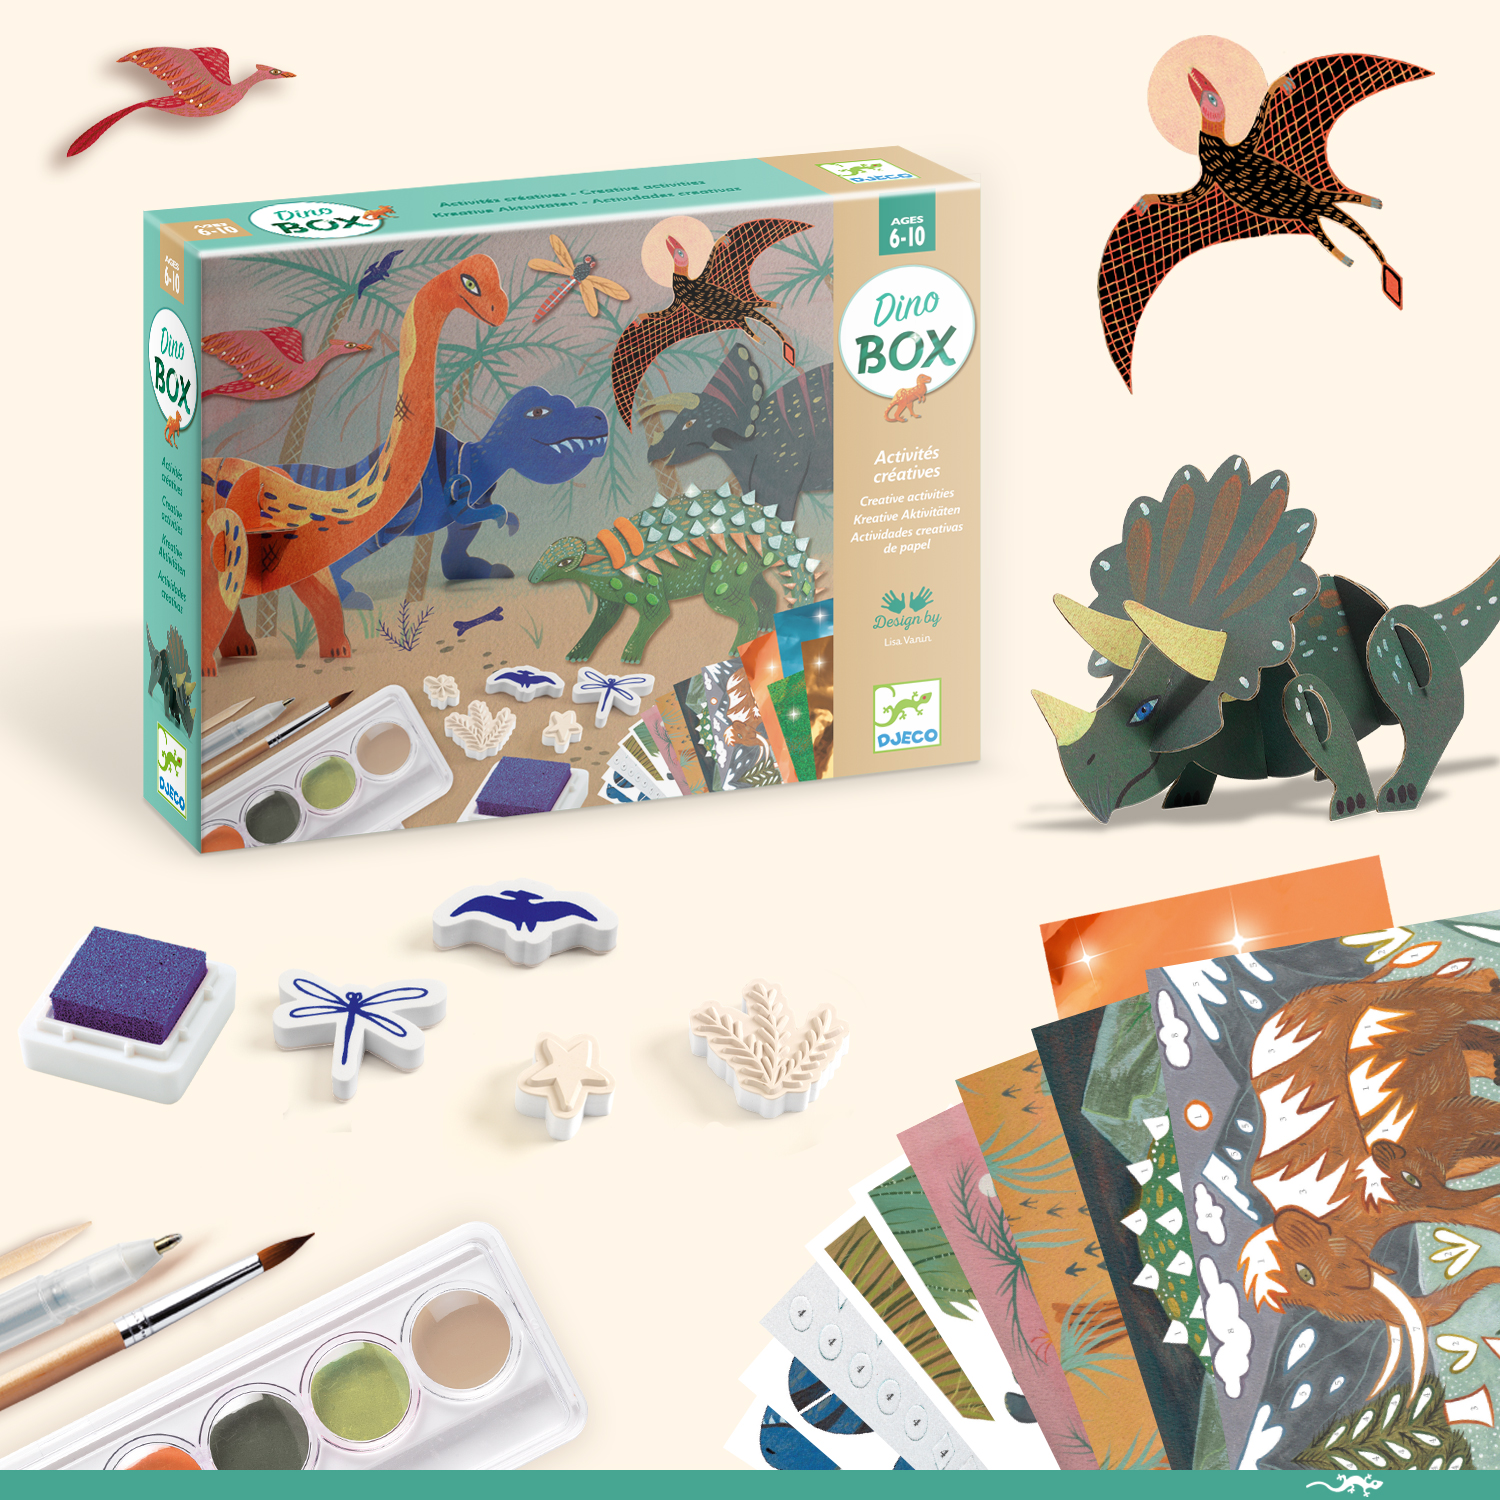 Djeco Card Game - Dino Draft » 30 Days Right of Cancellation